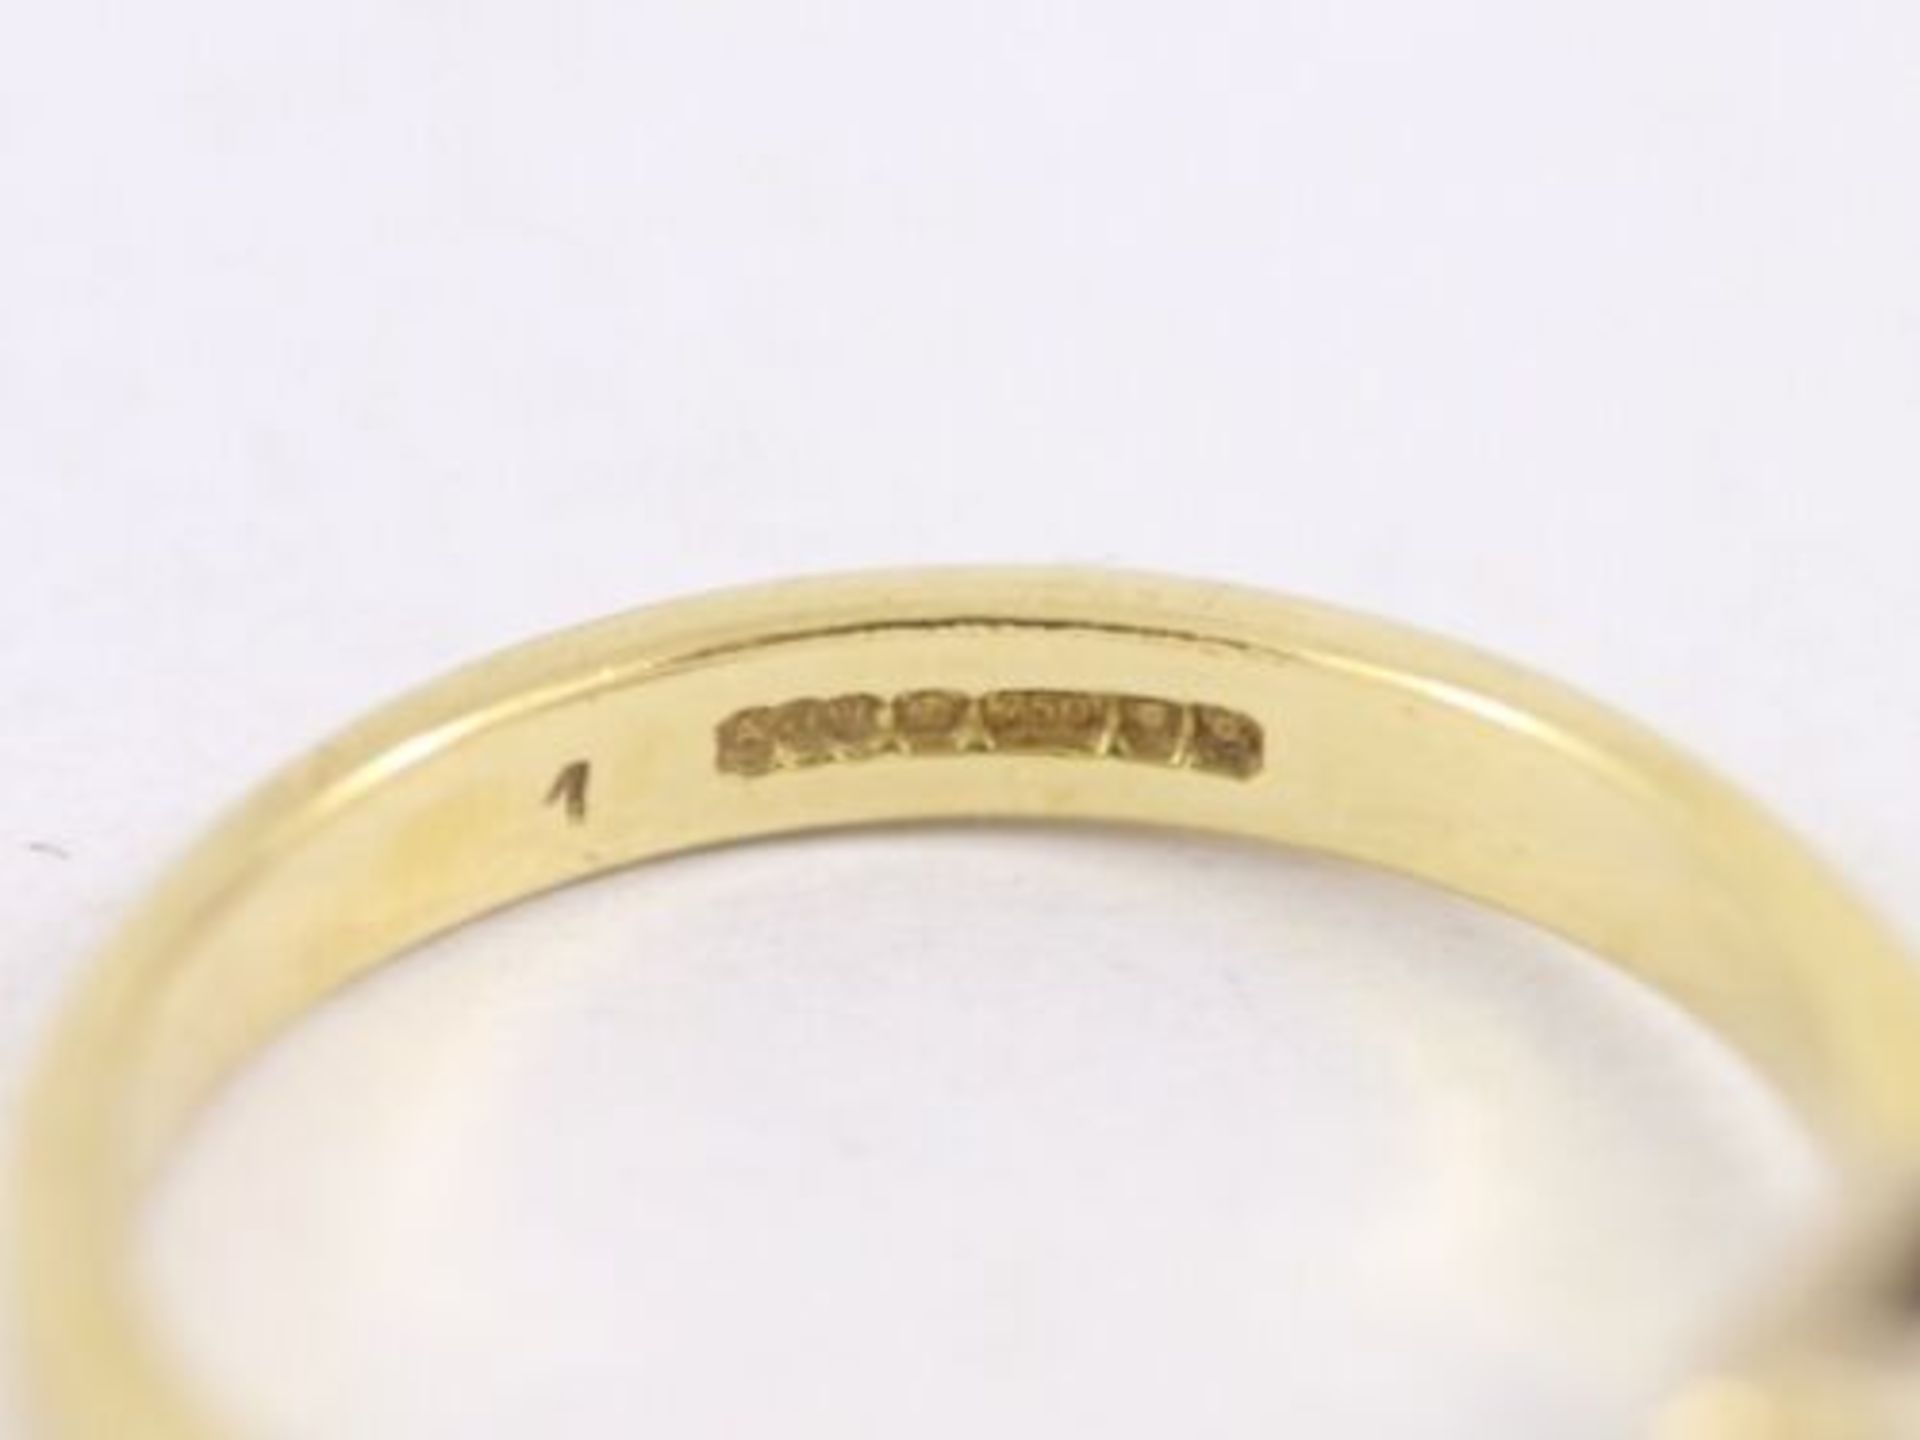 DIAMOND SOLITAIRE RING 18CT GOLD LADIES SIZE J 1/2 750 2.8G - Image 3 of 4